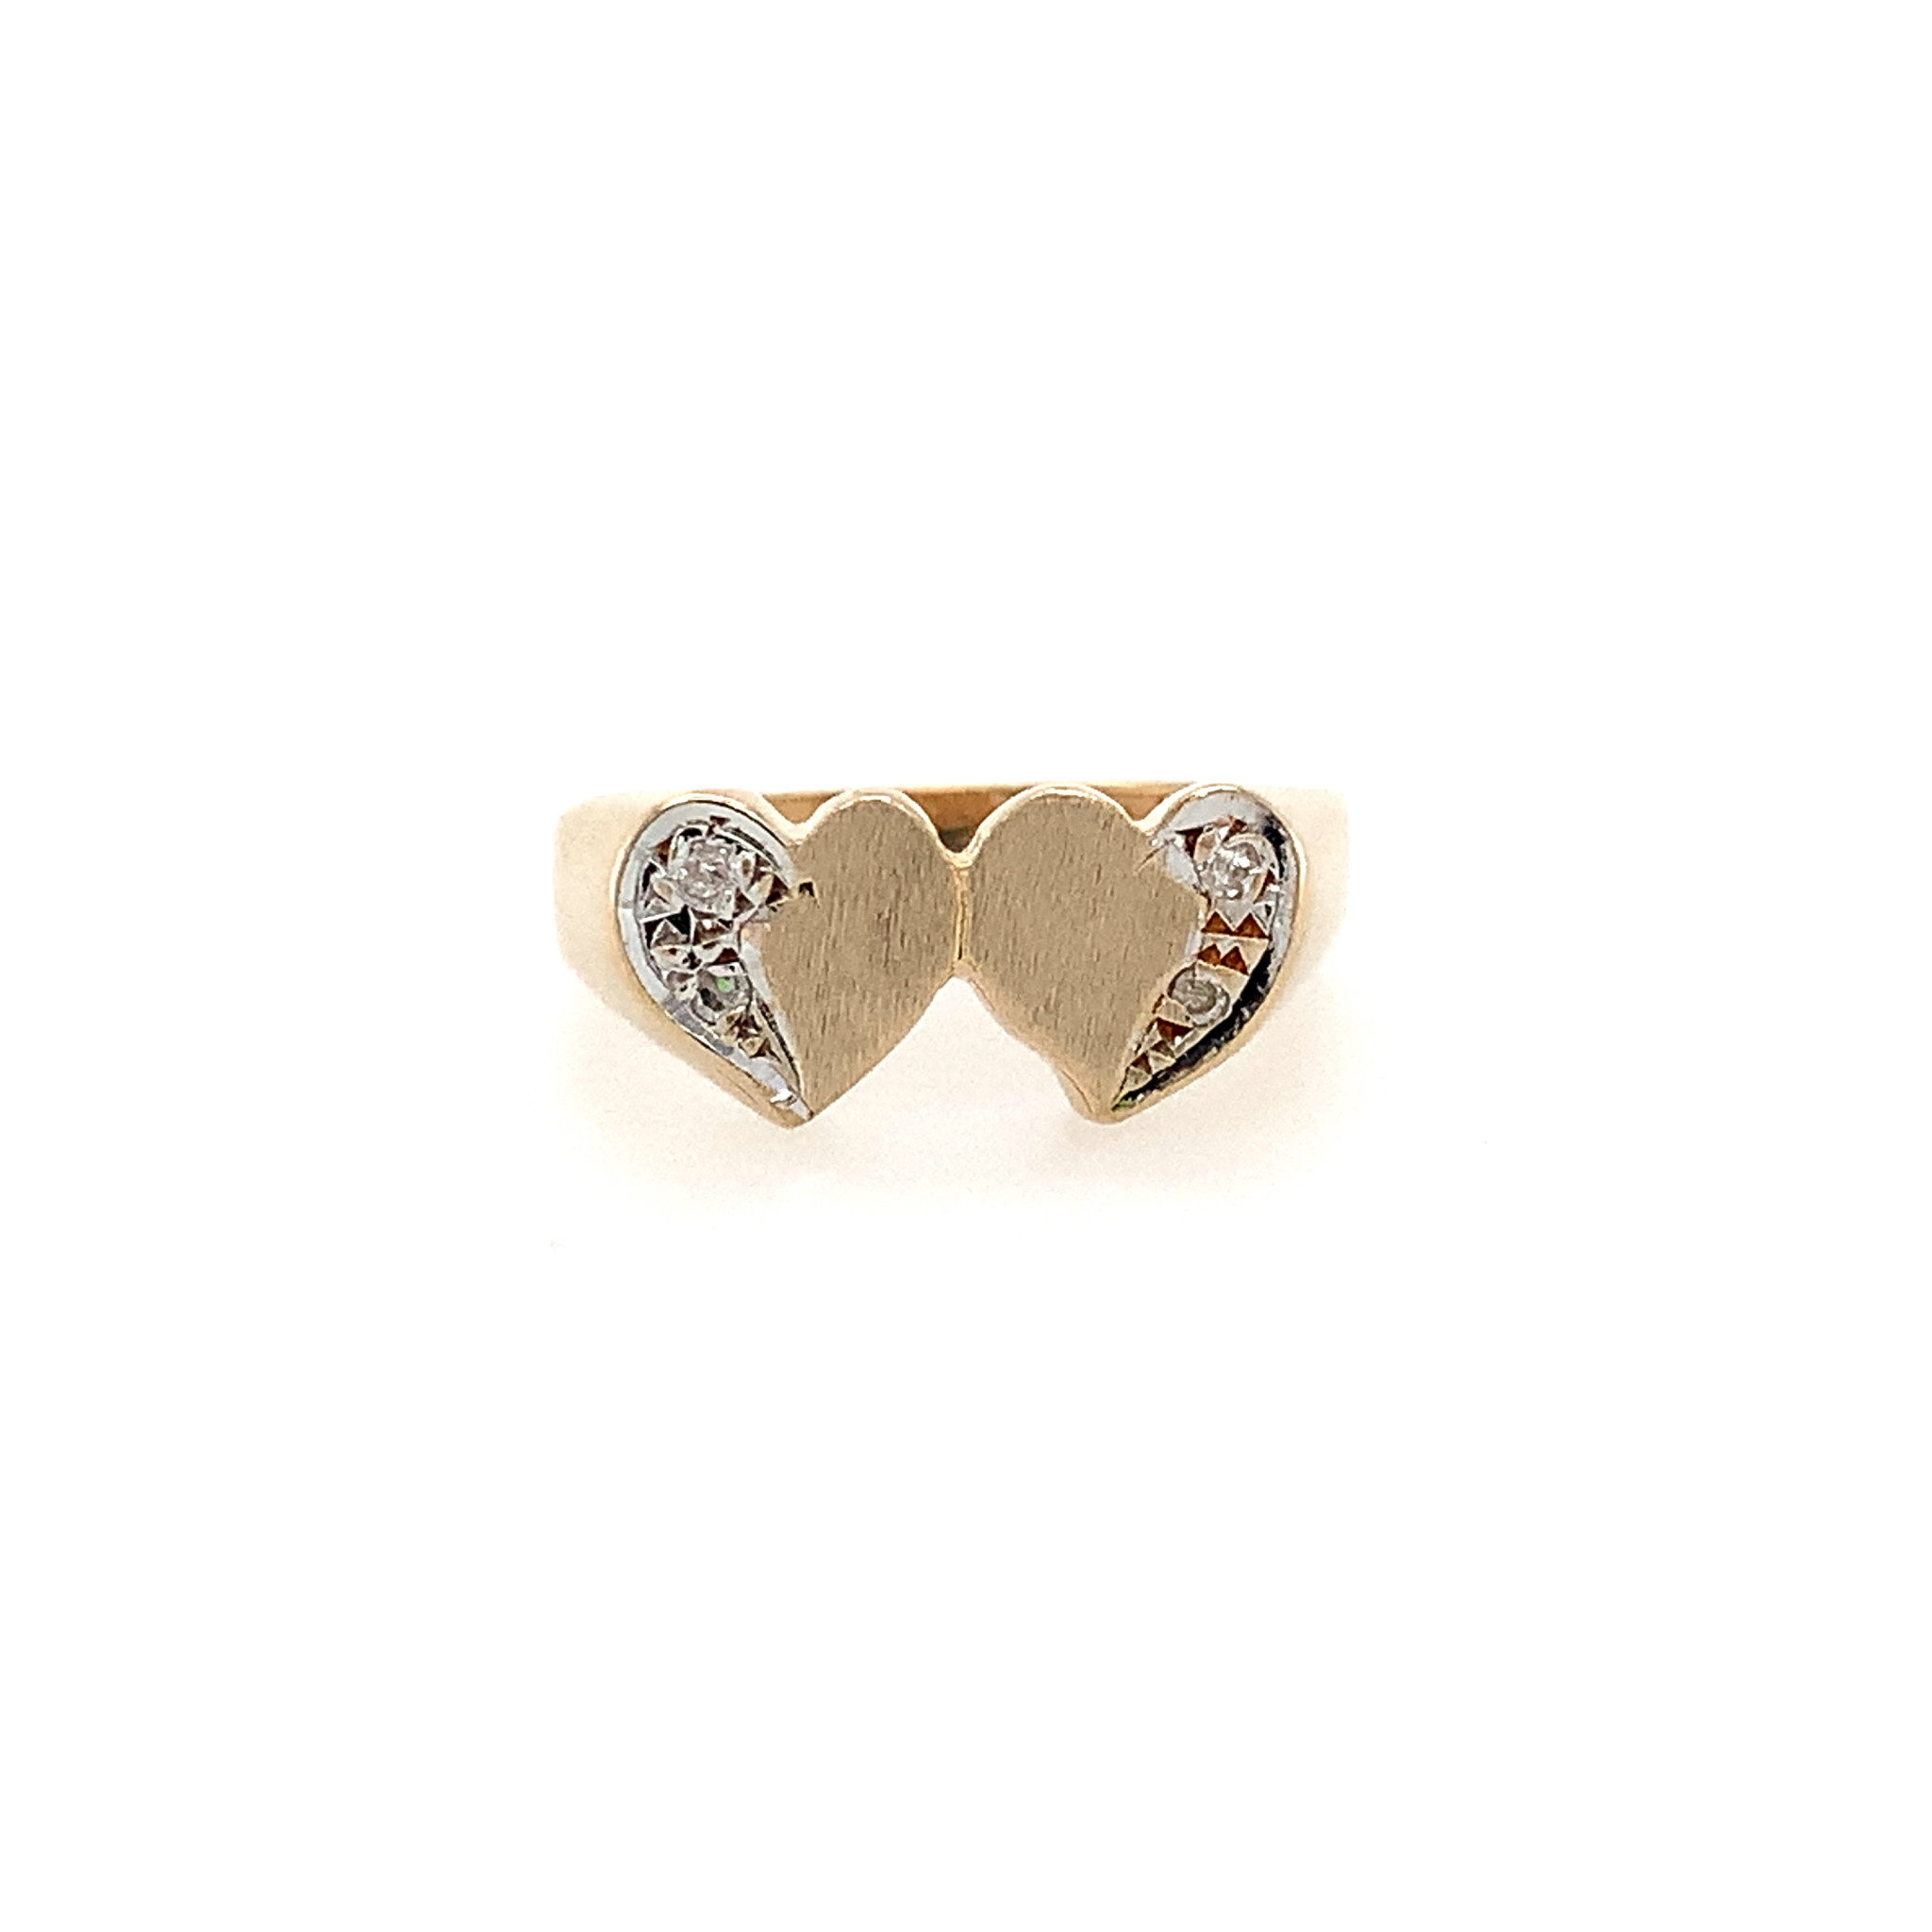 Engraved Double Heart Ring | Double heart ring, Heart ring, Double heart